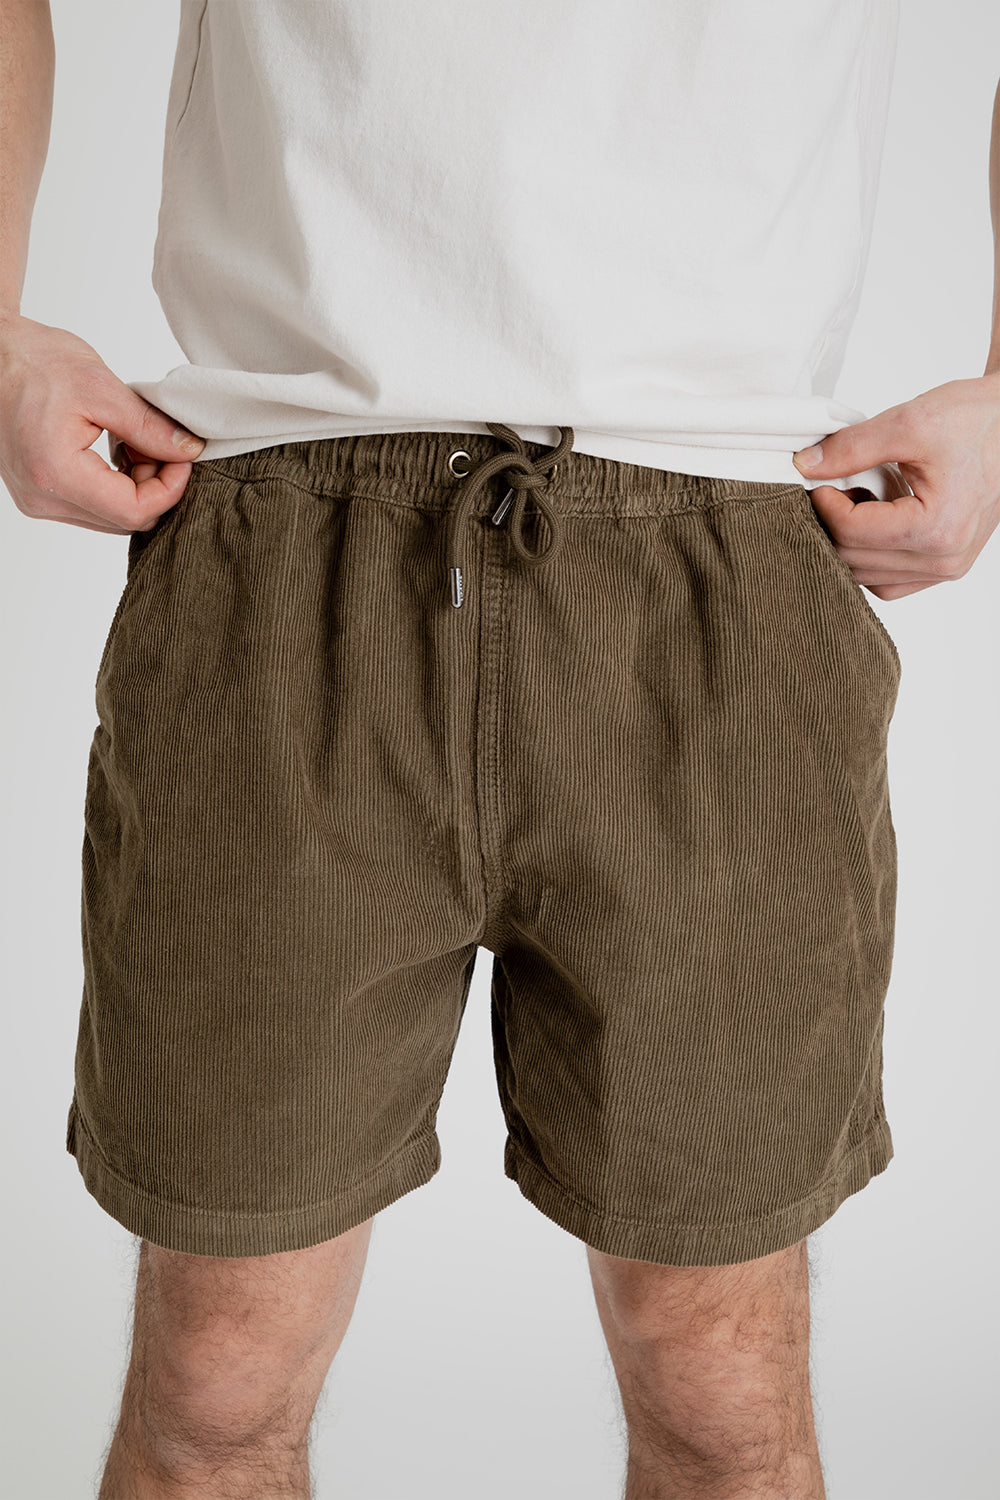 Foret Dose Corduroy Shorts in Army